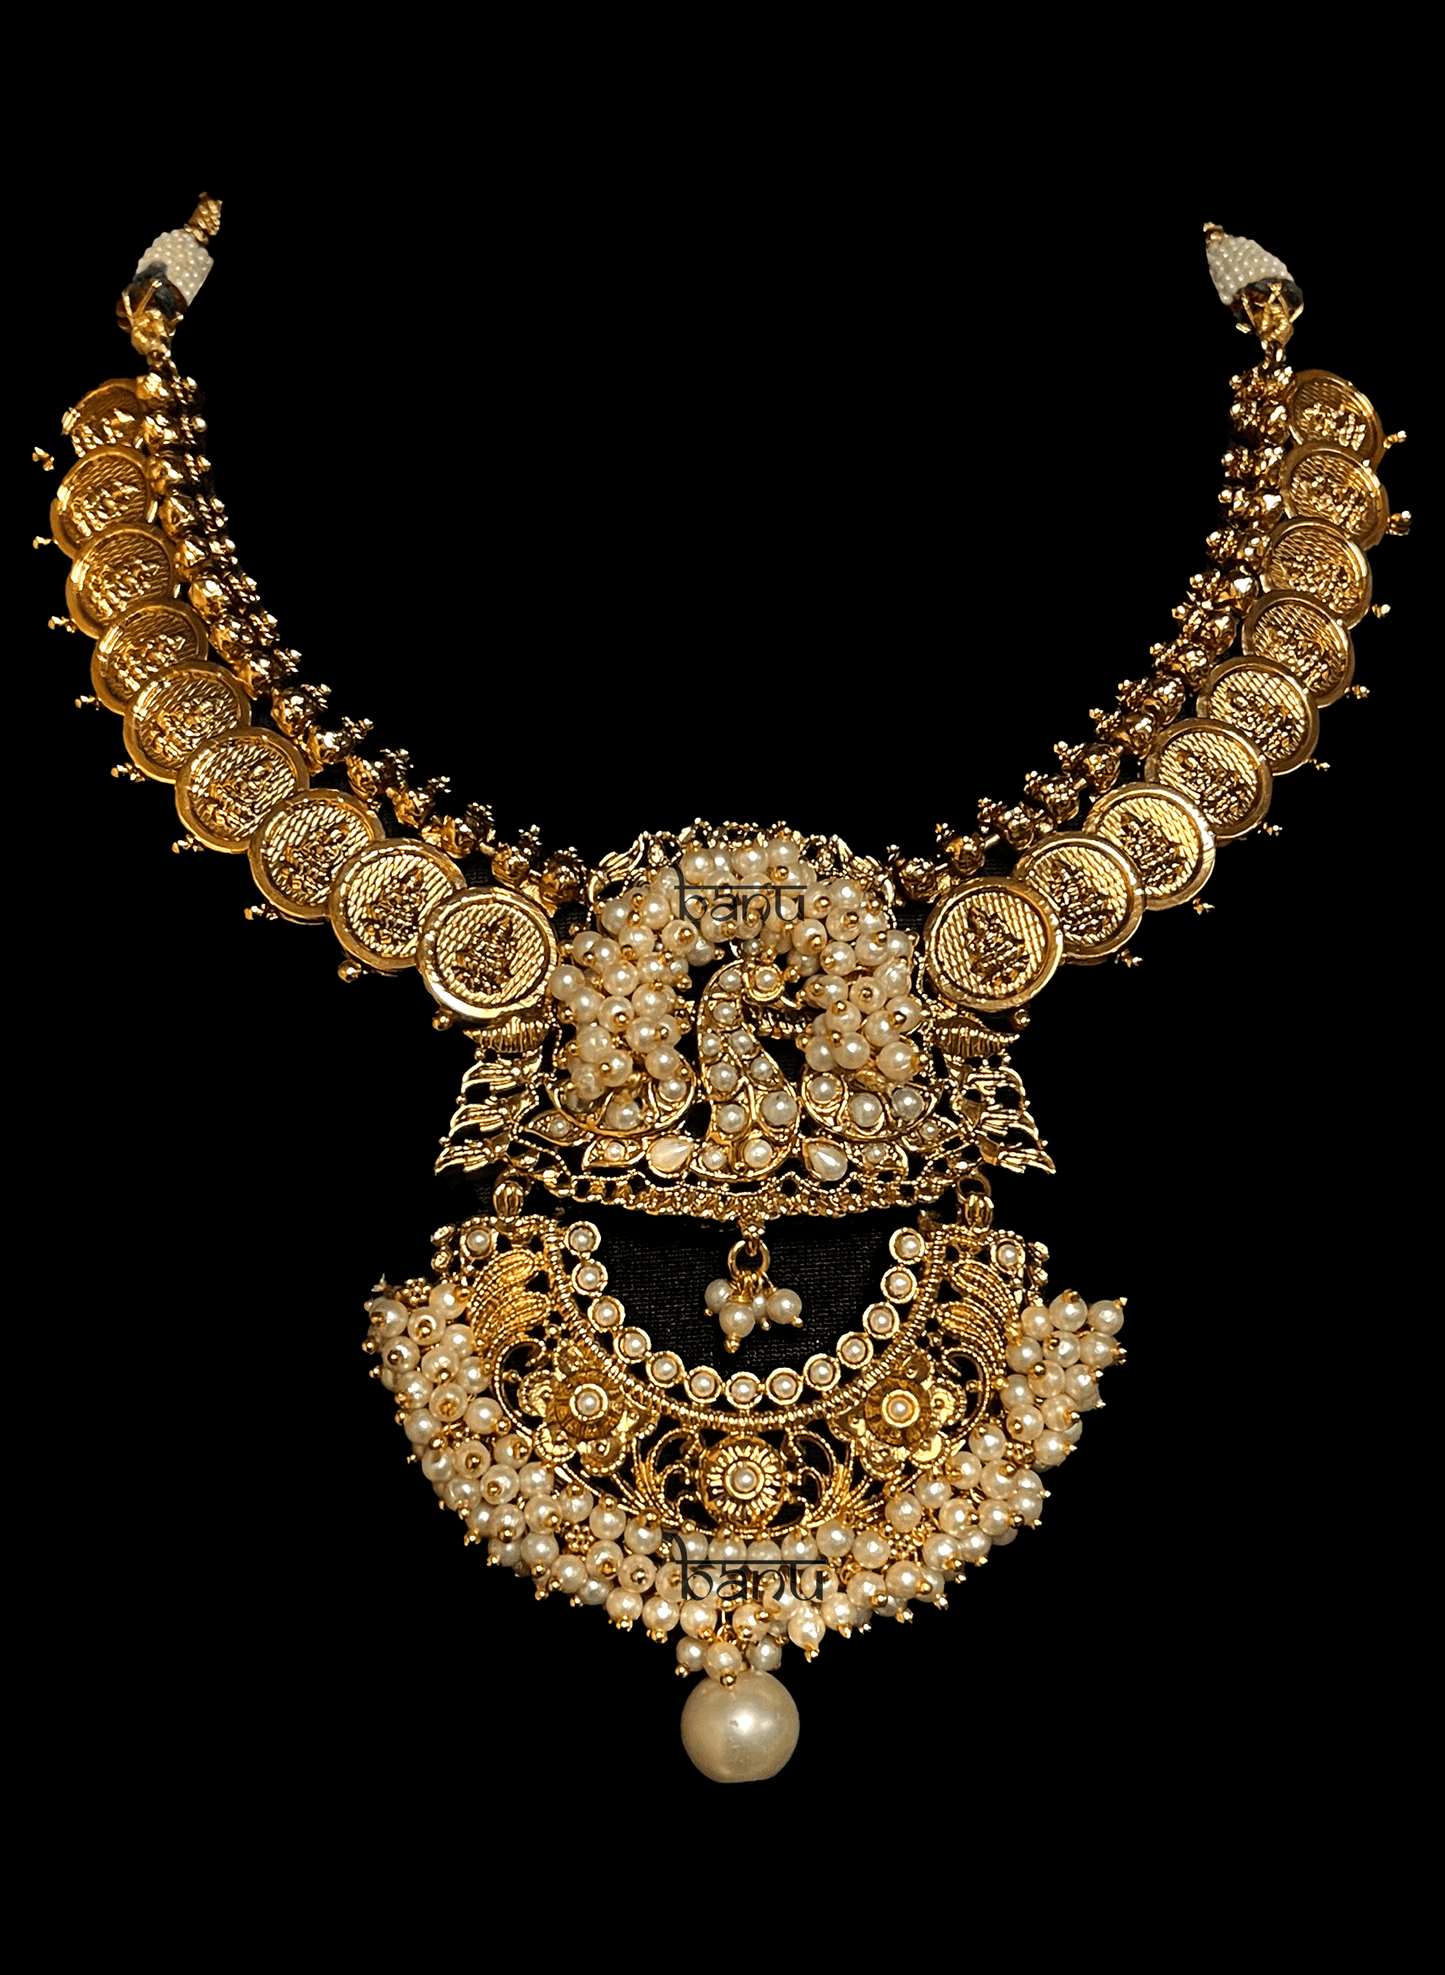 Kedar I - South Indian Coin Temple Jewelry w/ Pearls & Peacock Pendant